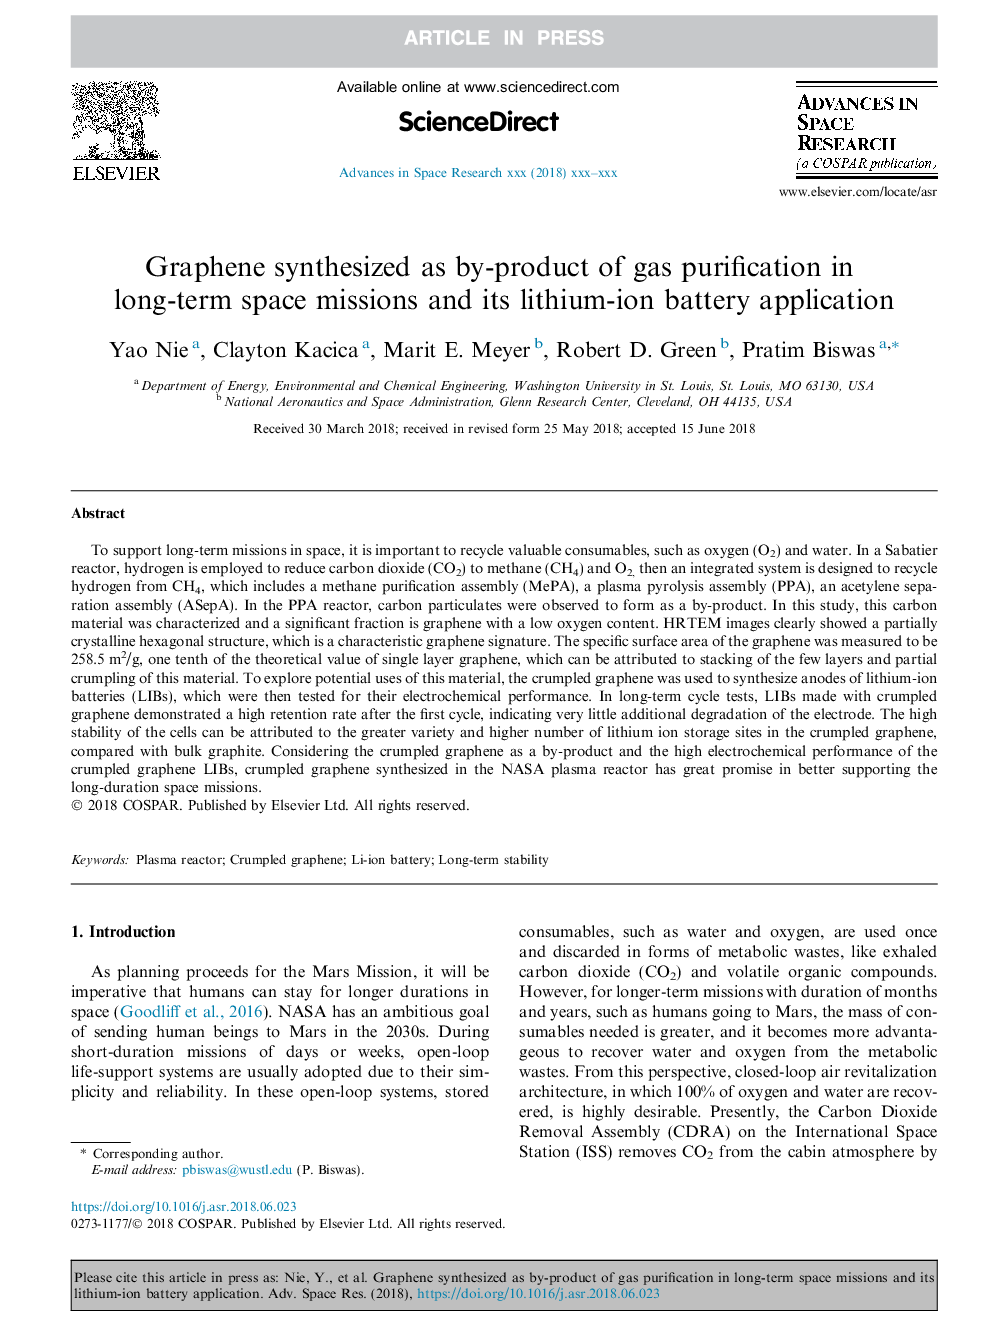 Graphene synthesized as by-product of gas purification in long-term space missions and its lithium-ion battery application